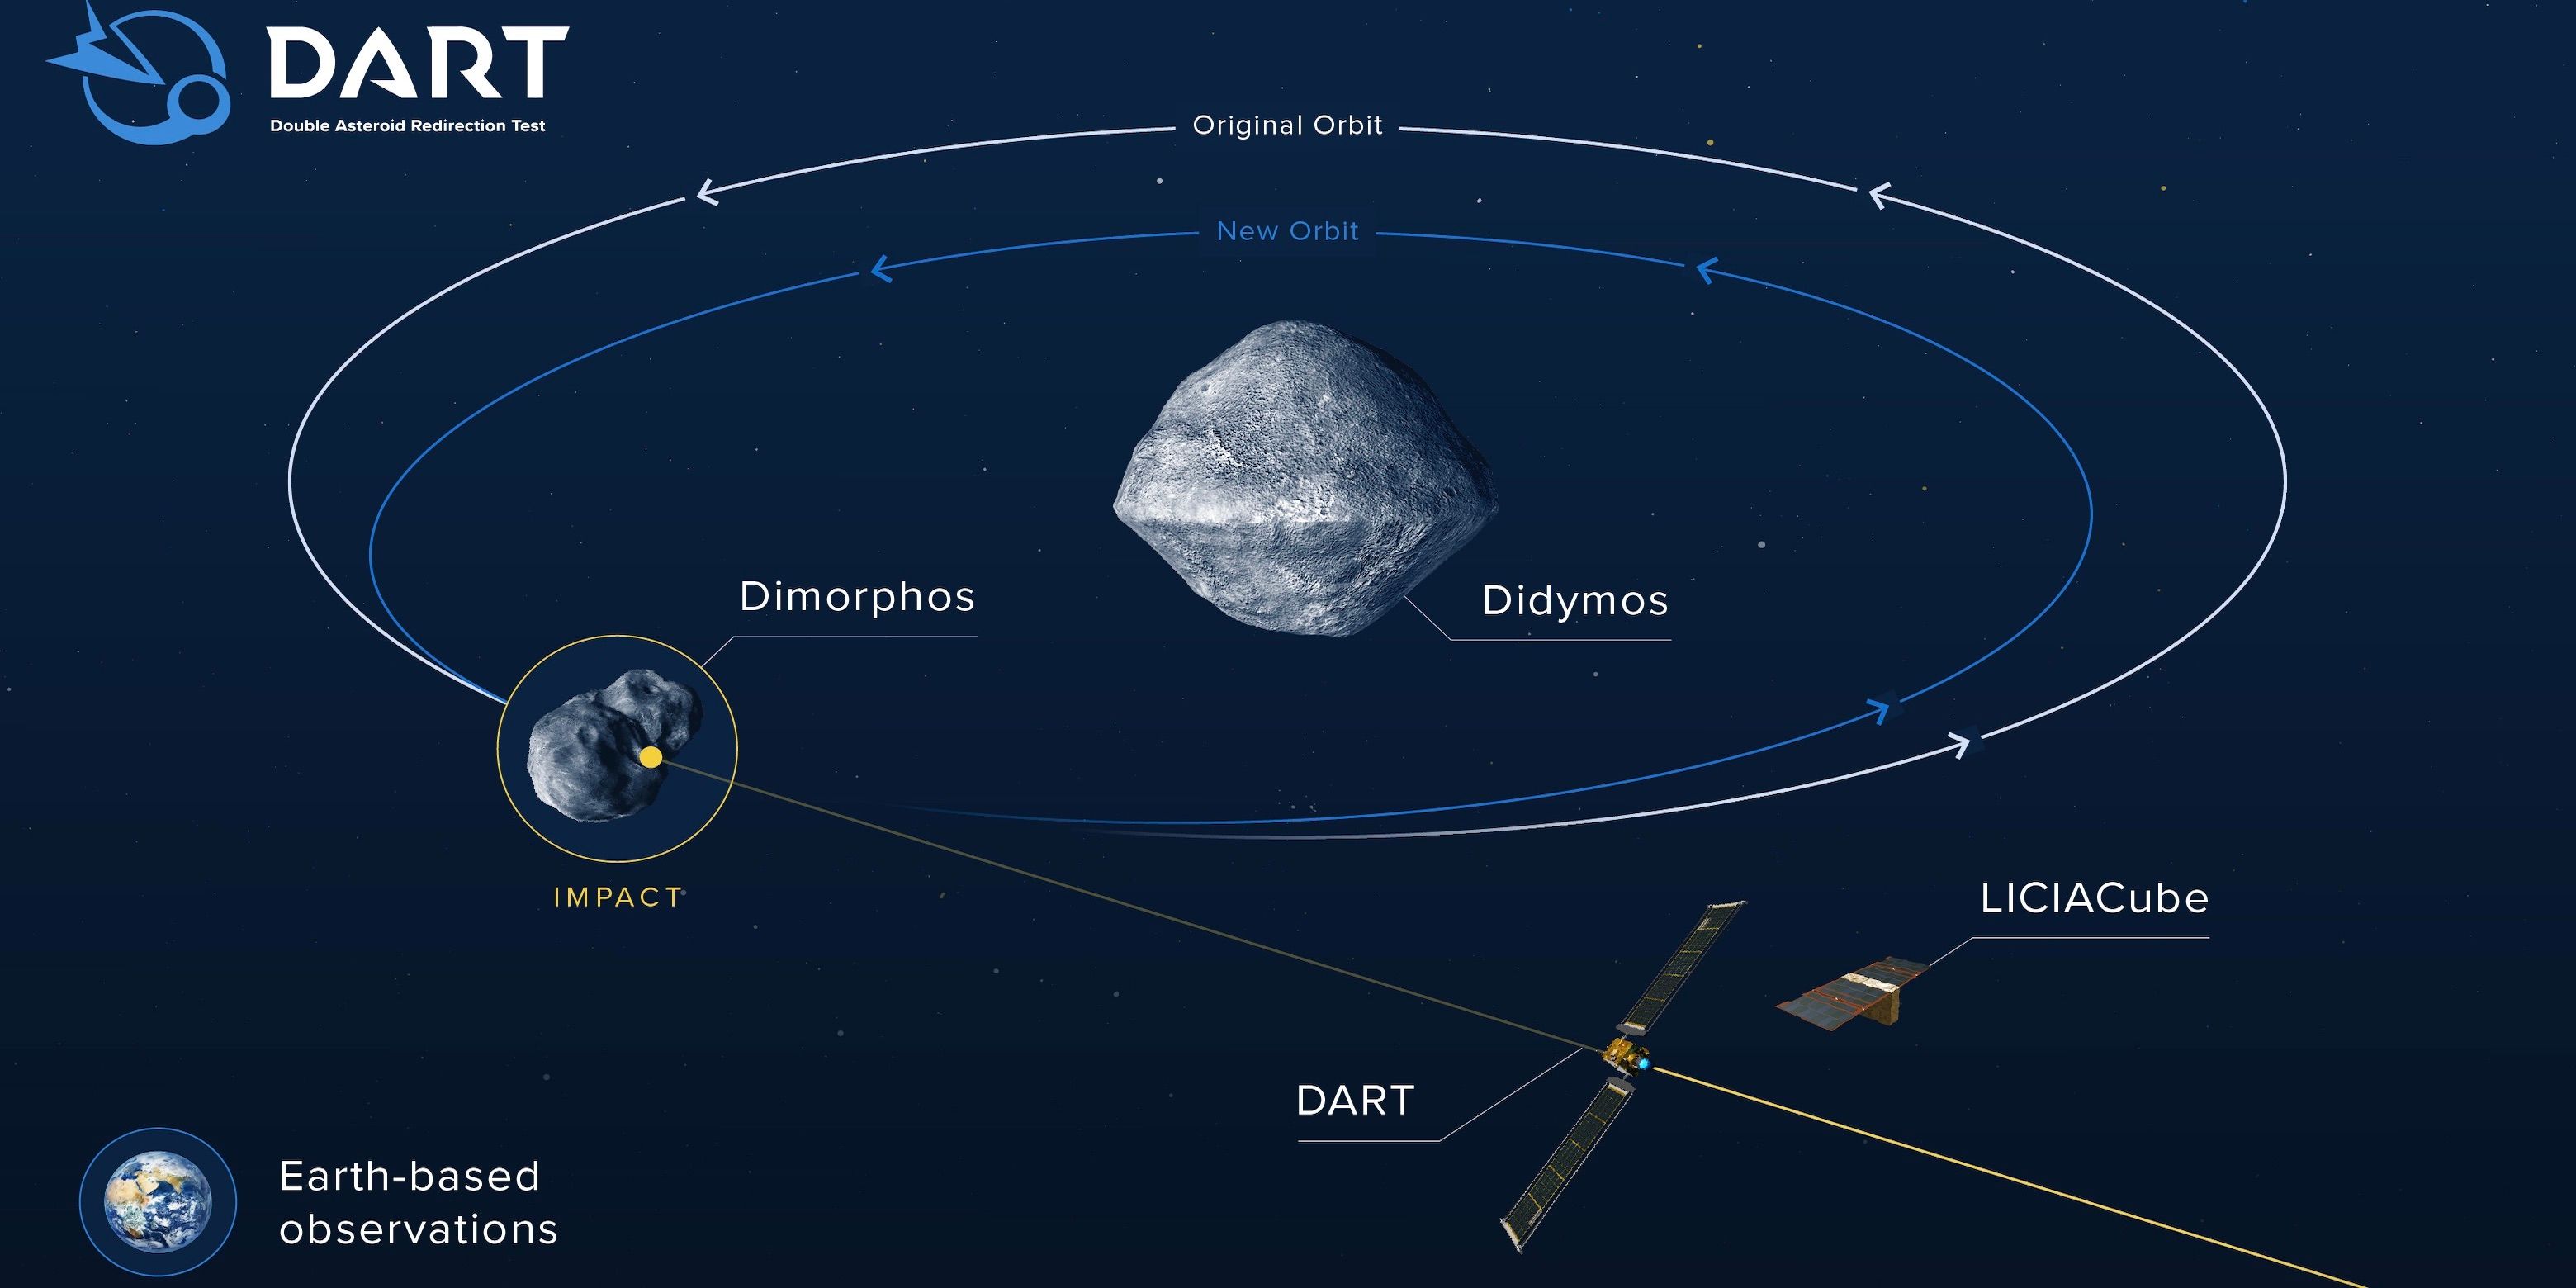 An illustration showing the current and anticipated orbits of Dimorphos after impact.